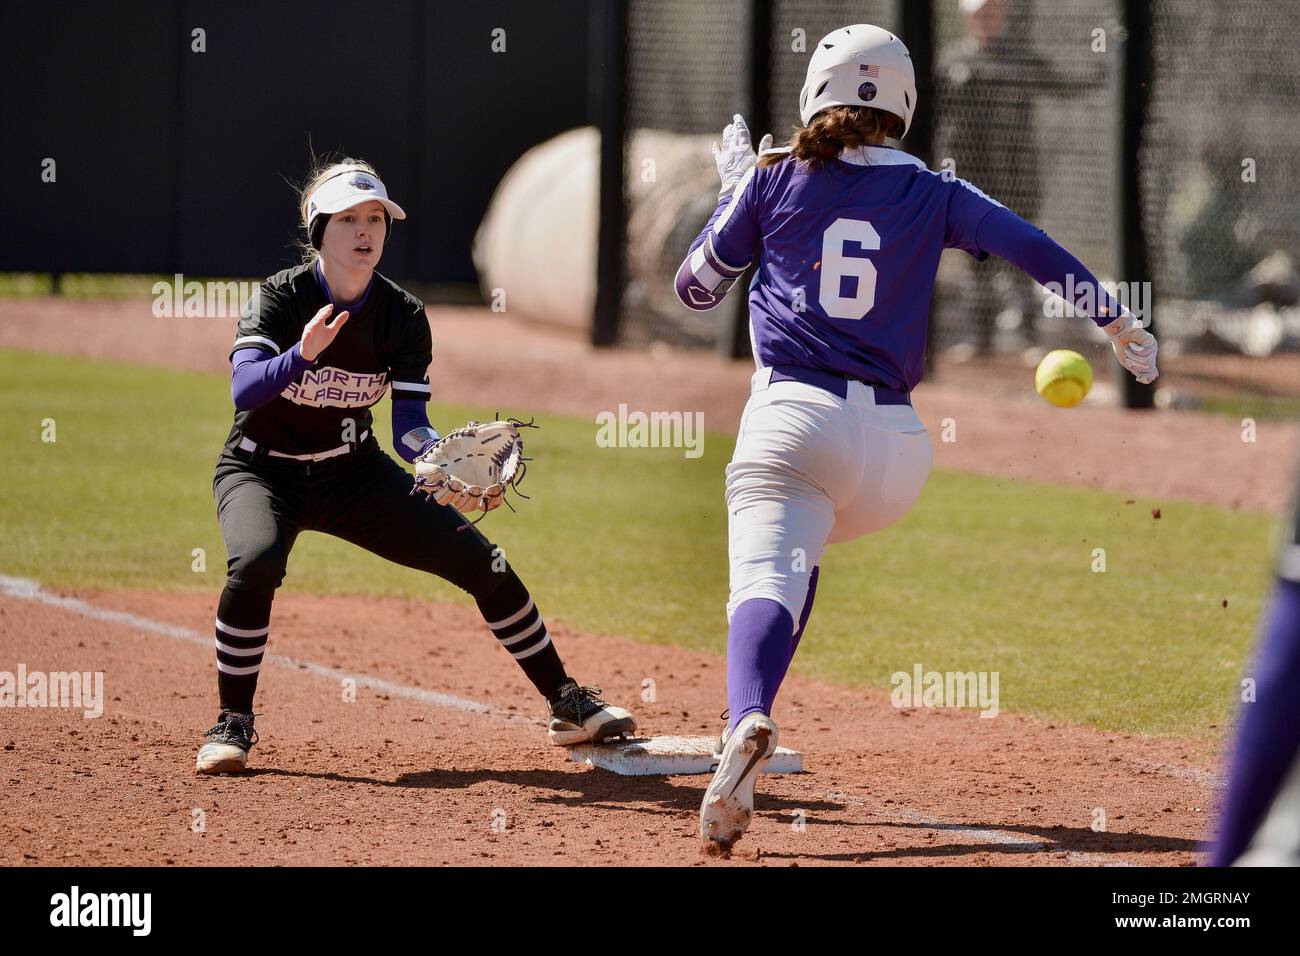 North Alabama's Emma Latham, left, catches ahead of Evansville's Kat during an NCAA softball game on Friday, Feb. 28, 2020 in Memphis, Tenn. (AP Photo/Brandon Dill Stock Photo - Alamy